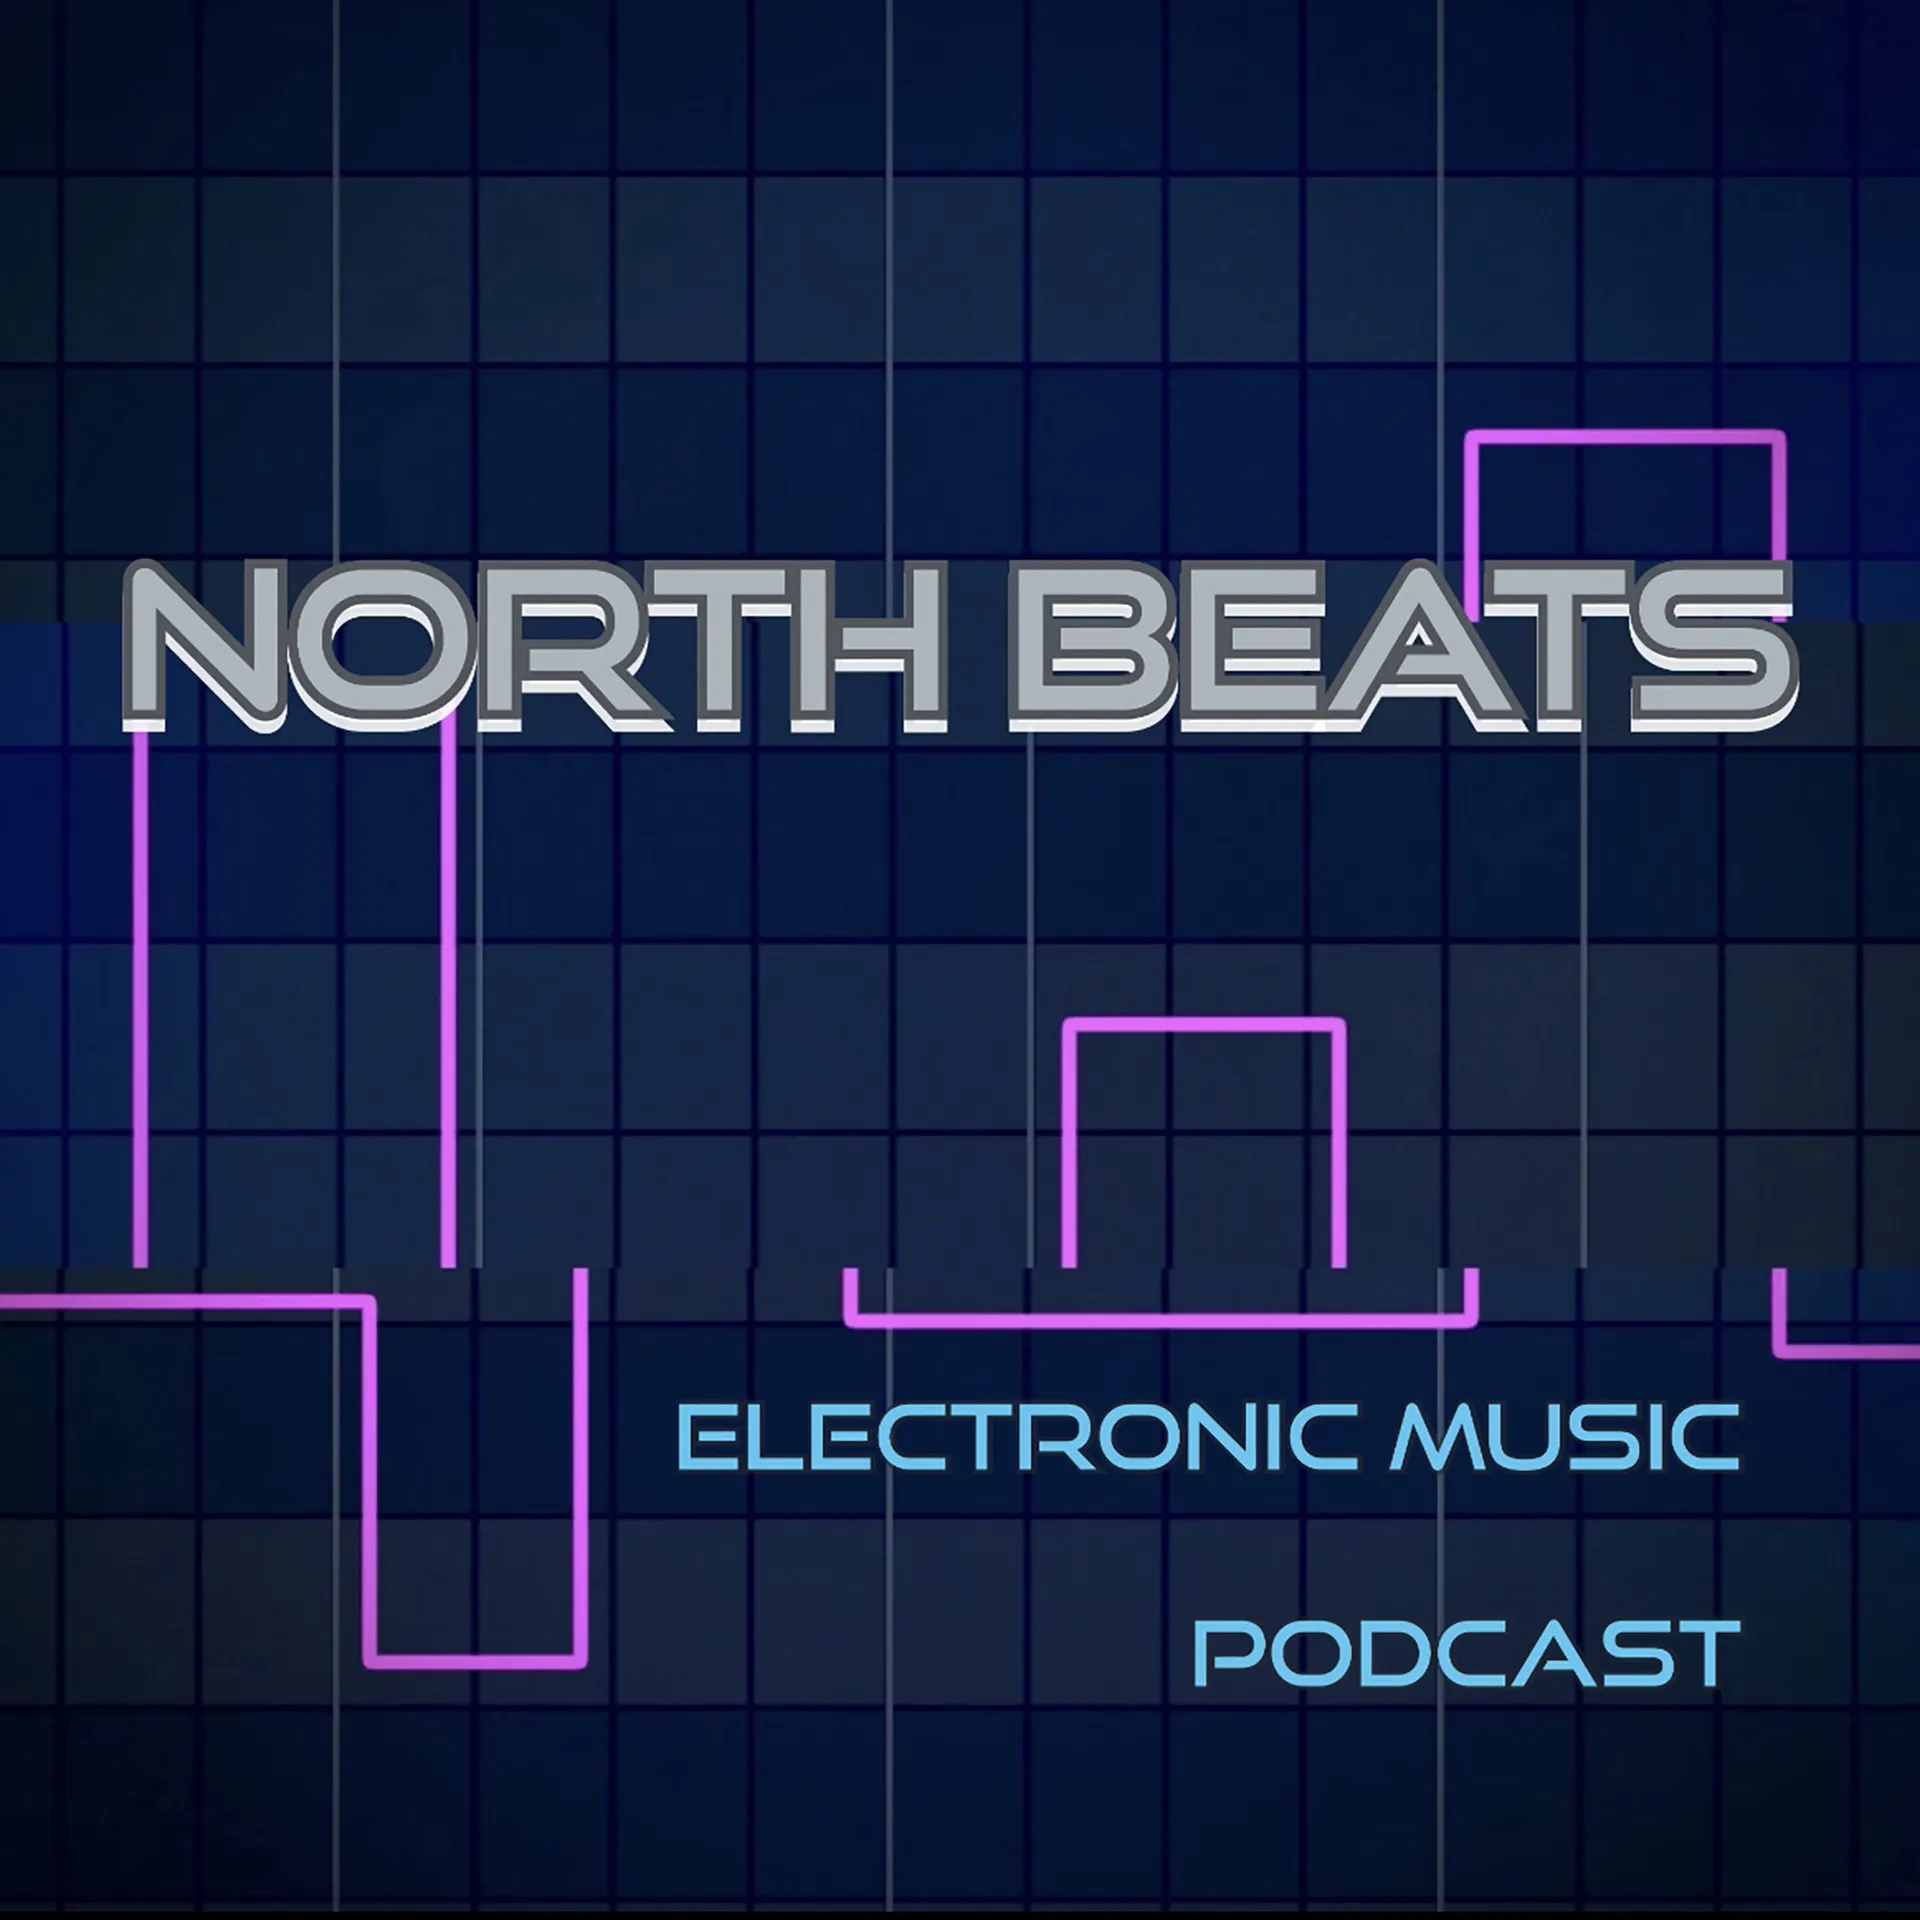 Jeremy Cotta interview on North Beats podcast